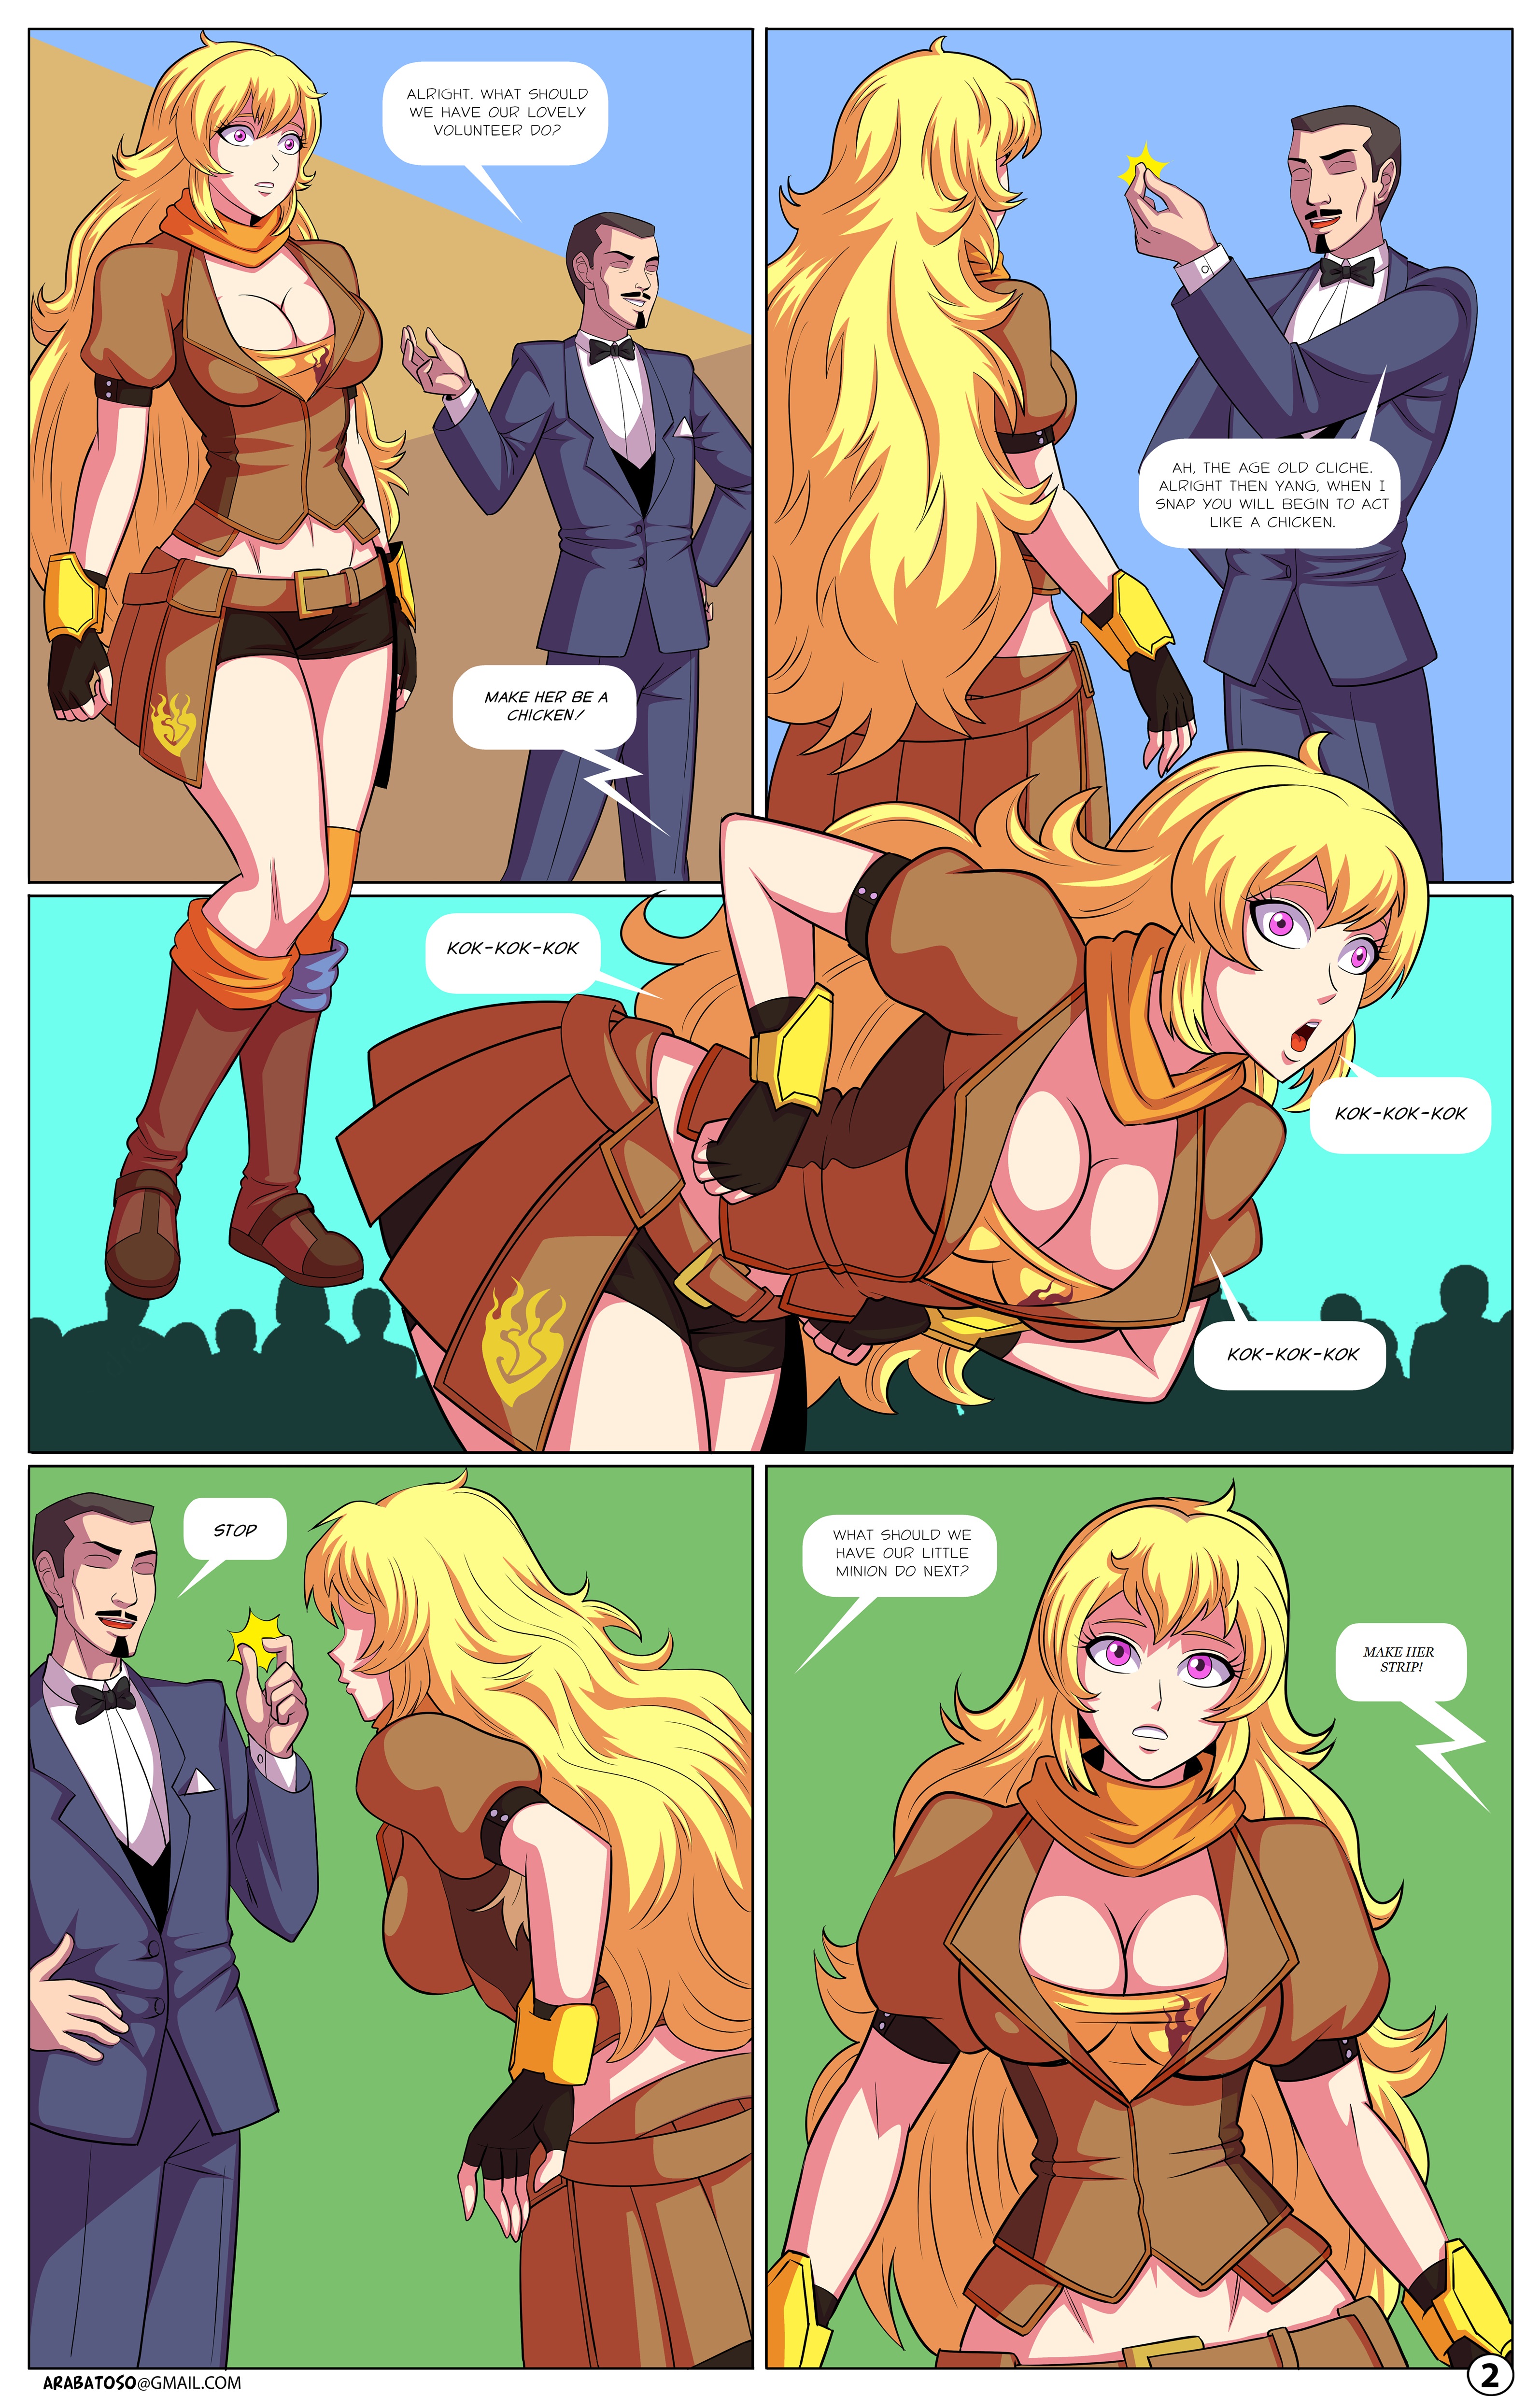 Updated by Arabatos RWBY Universe H Update 9 pages Porn Comics